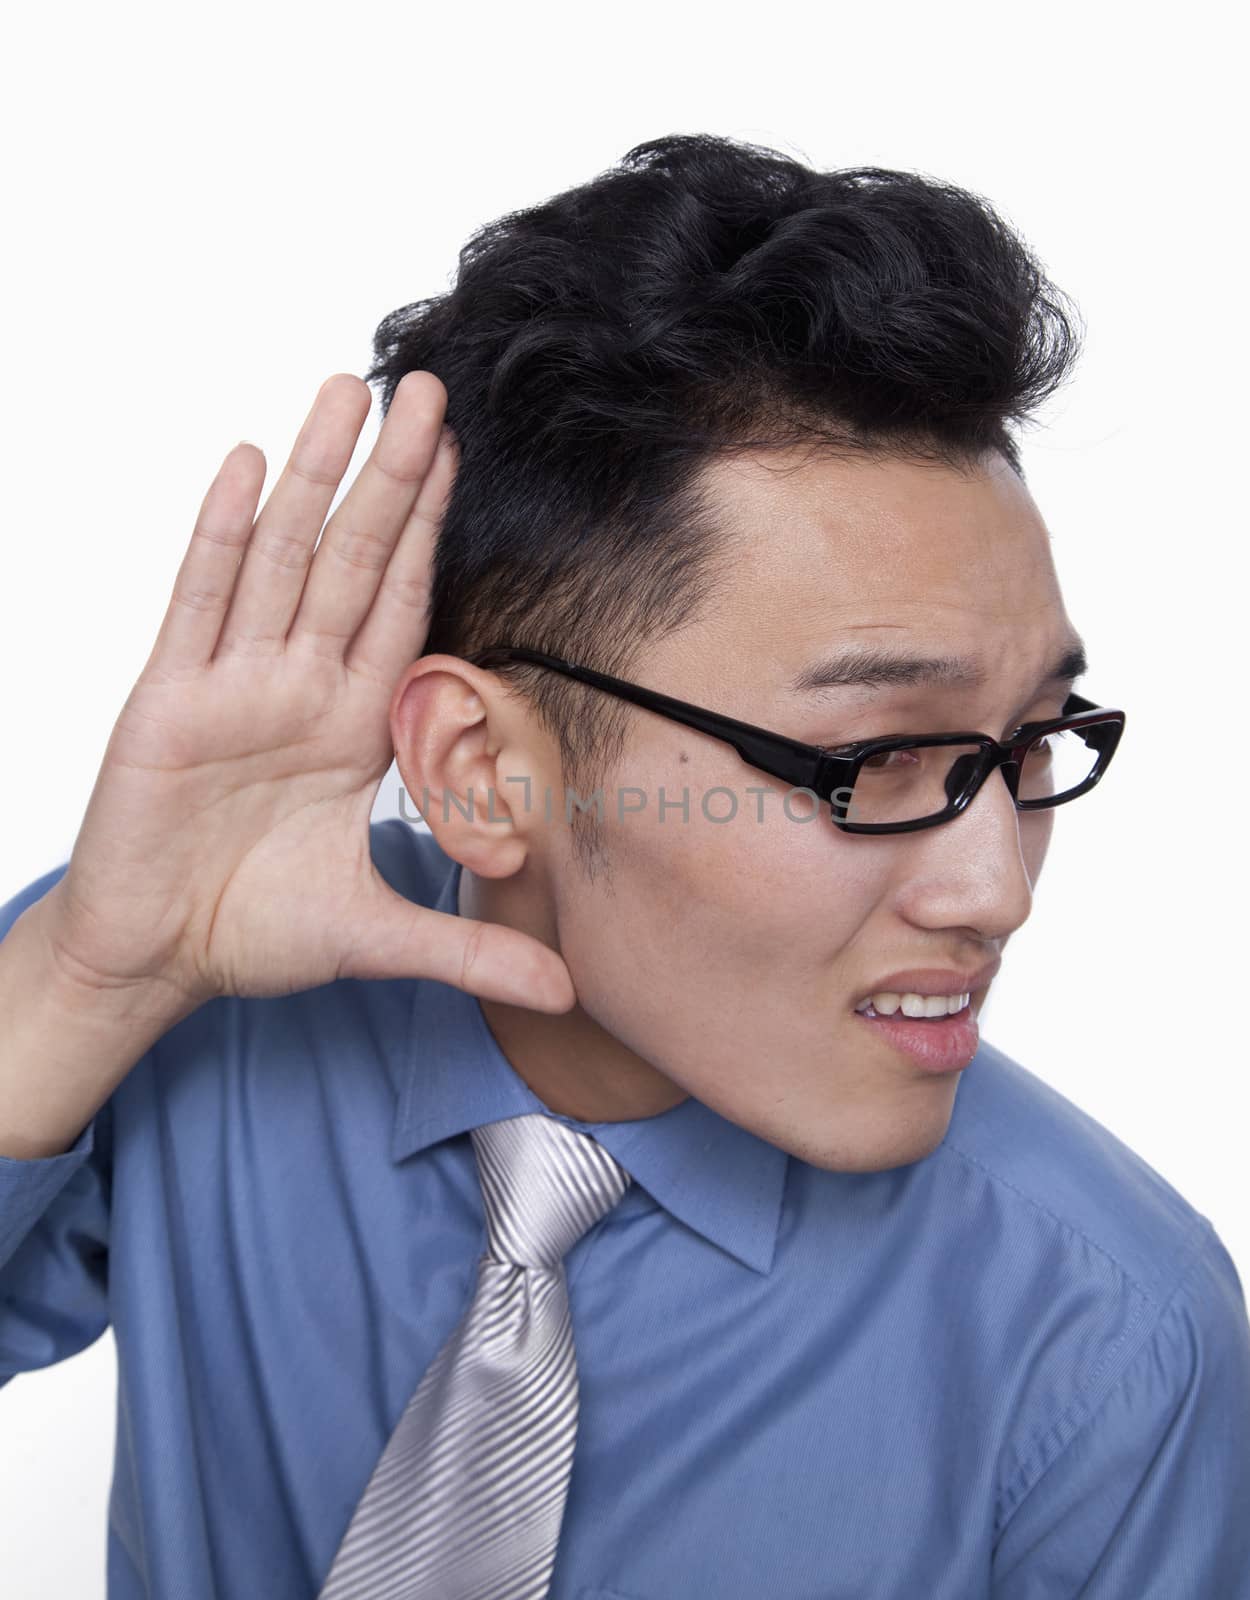 Businessman Holding Hand Up to Ear